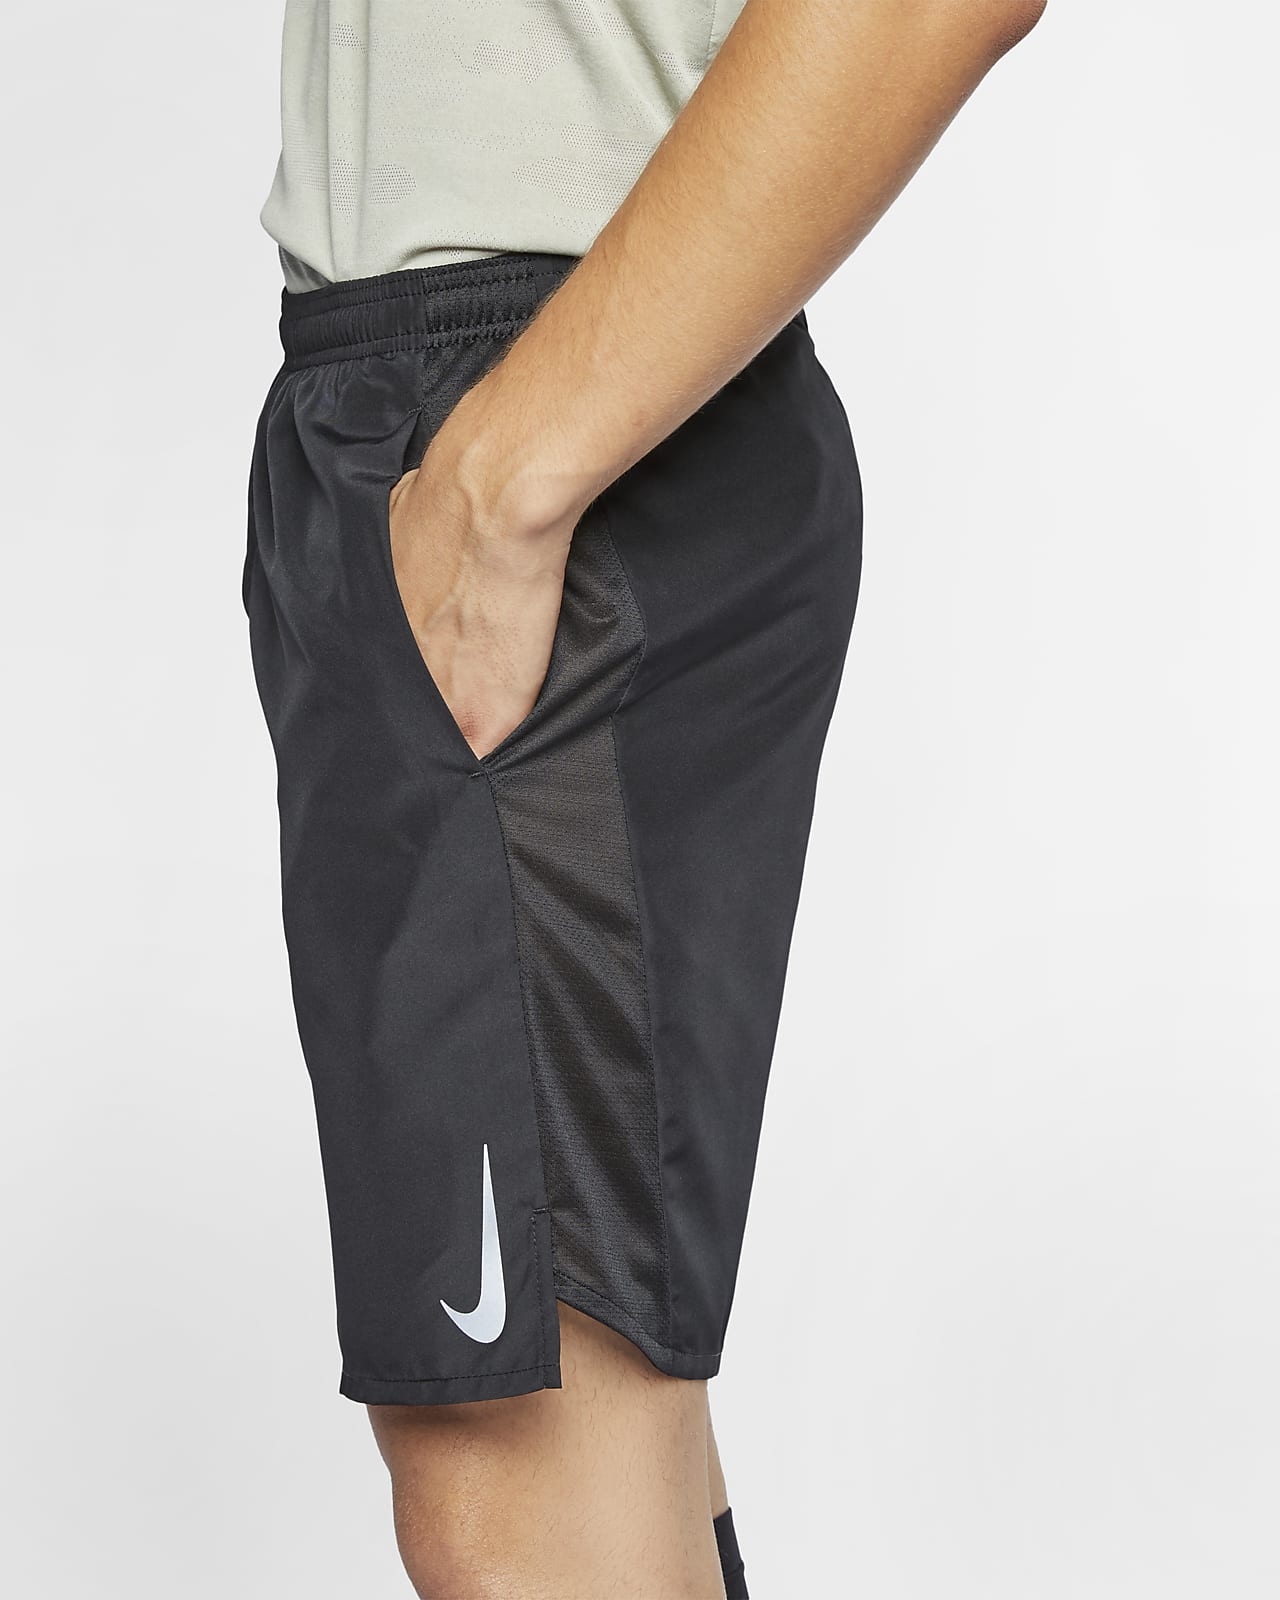 nike challenger shorts 9 inch